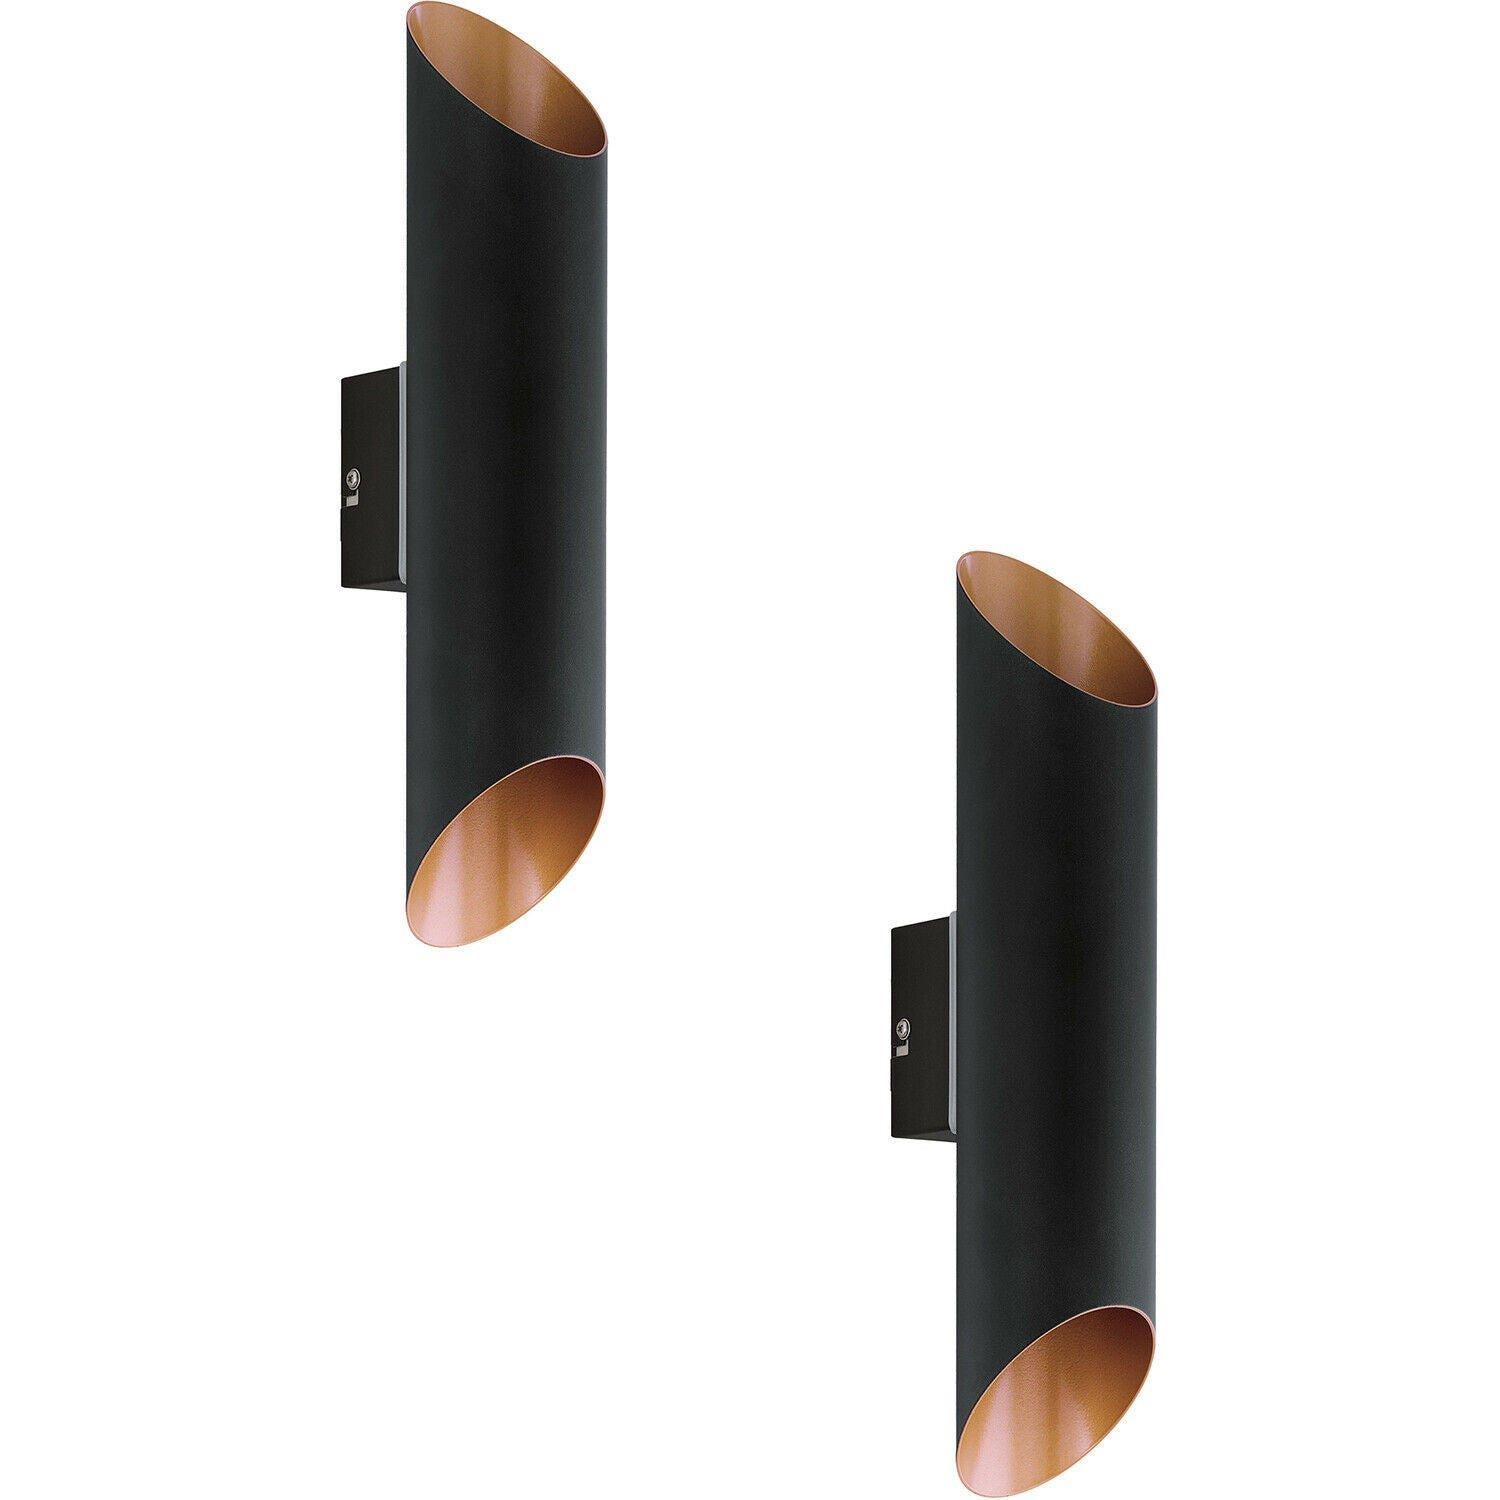 2 PACK IP44 Outdoor Wall Light Black & Copper Modern Up Down Lamp 3.7W LED